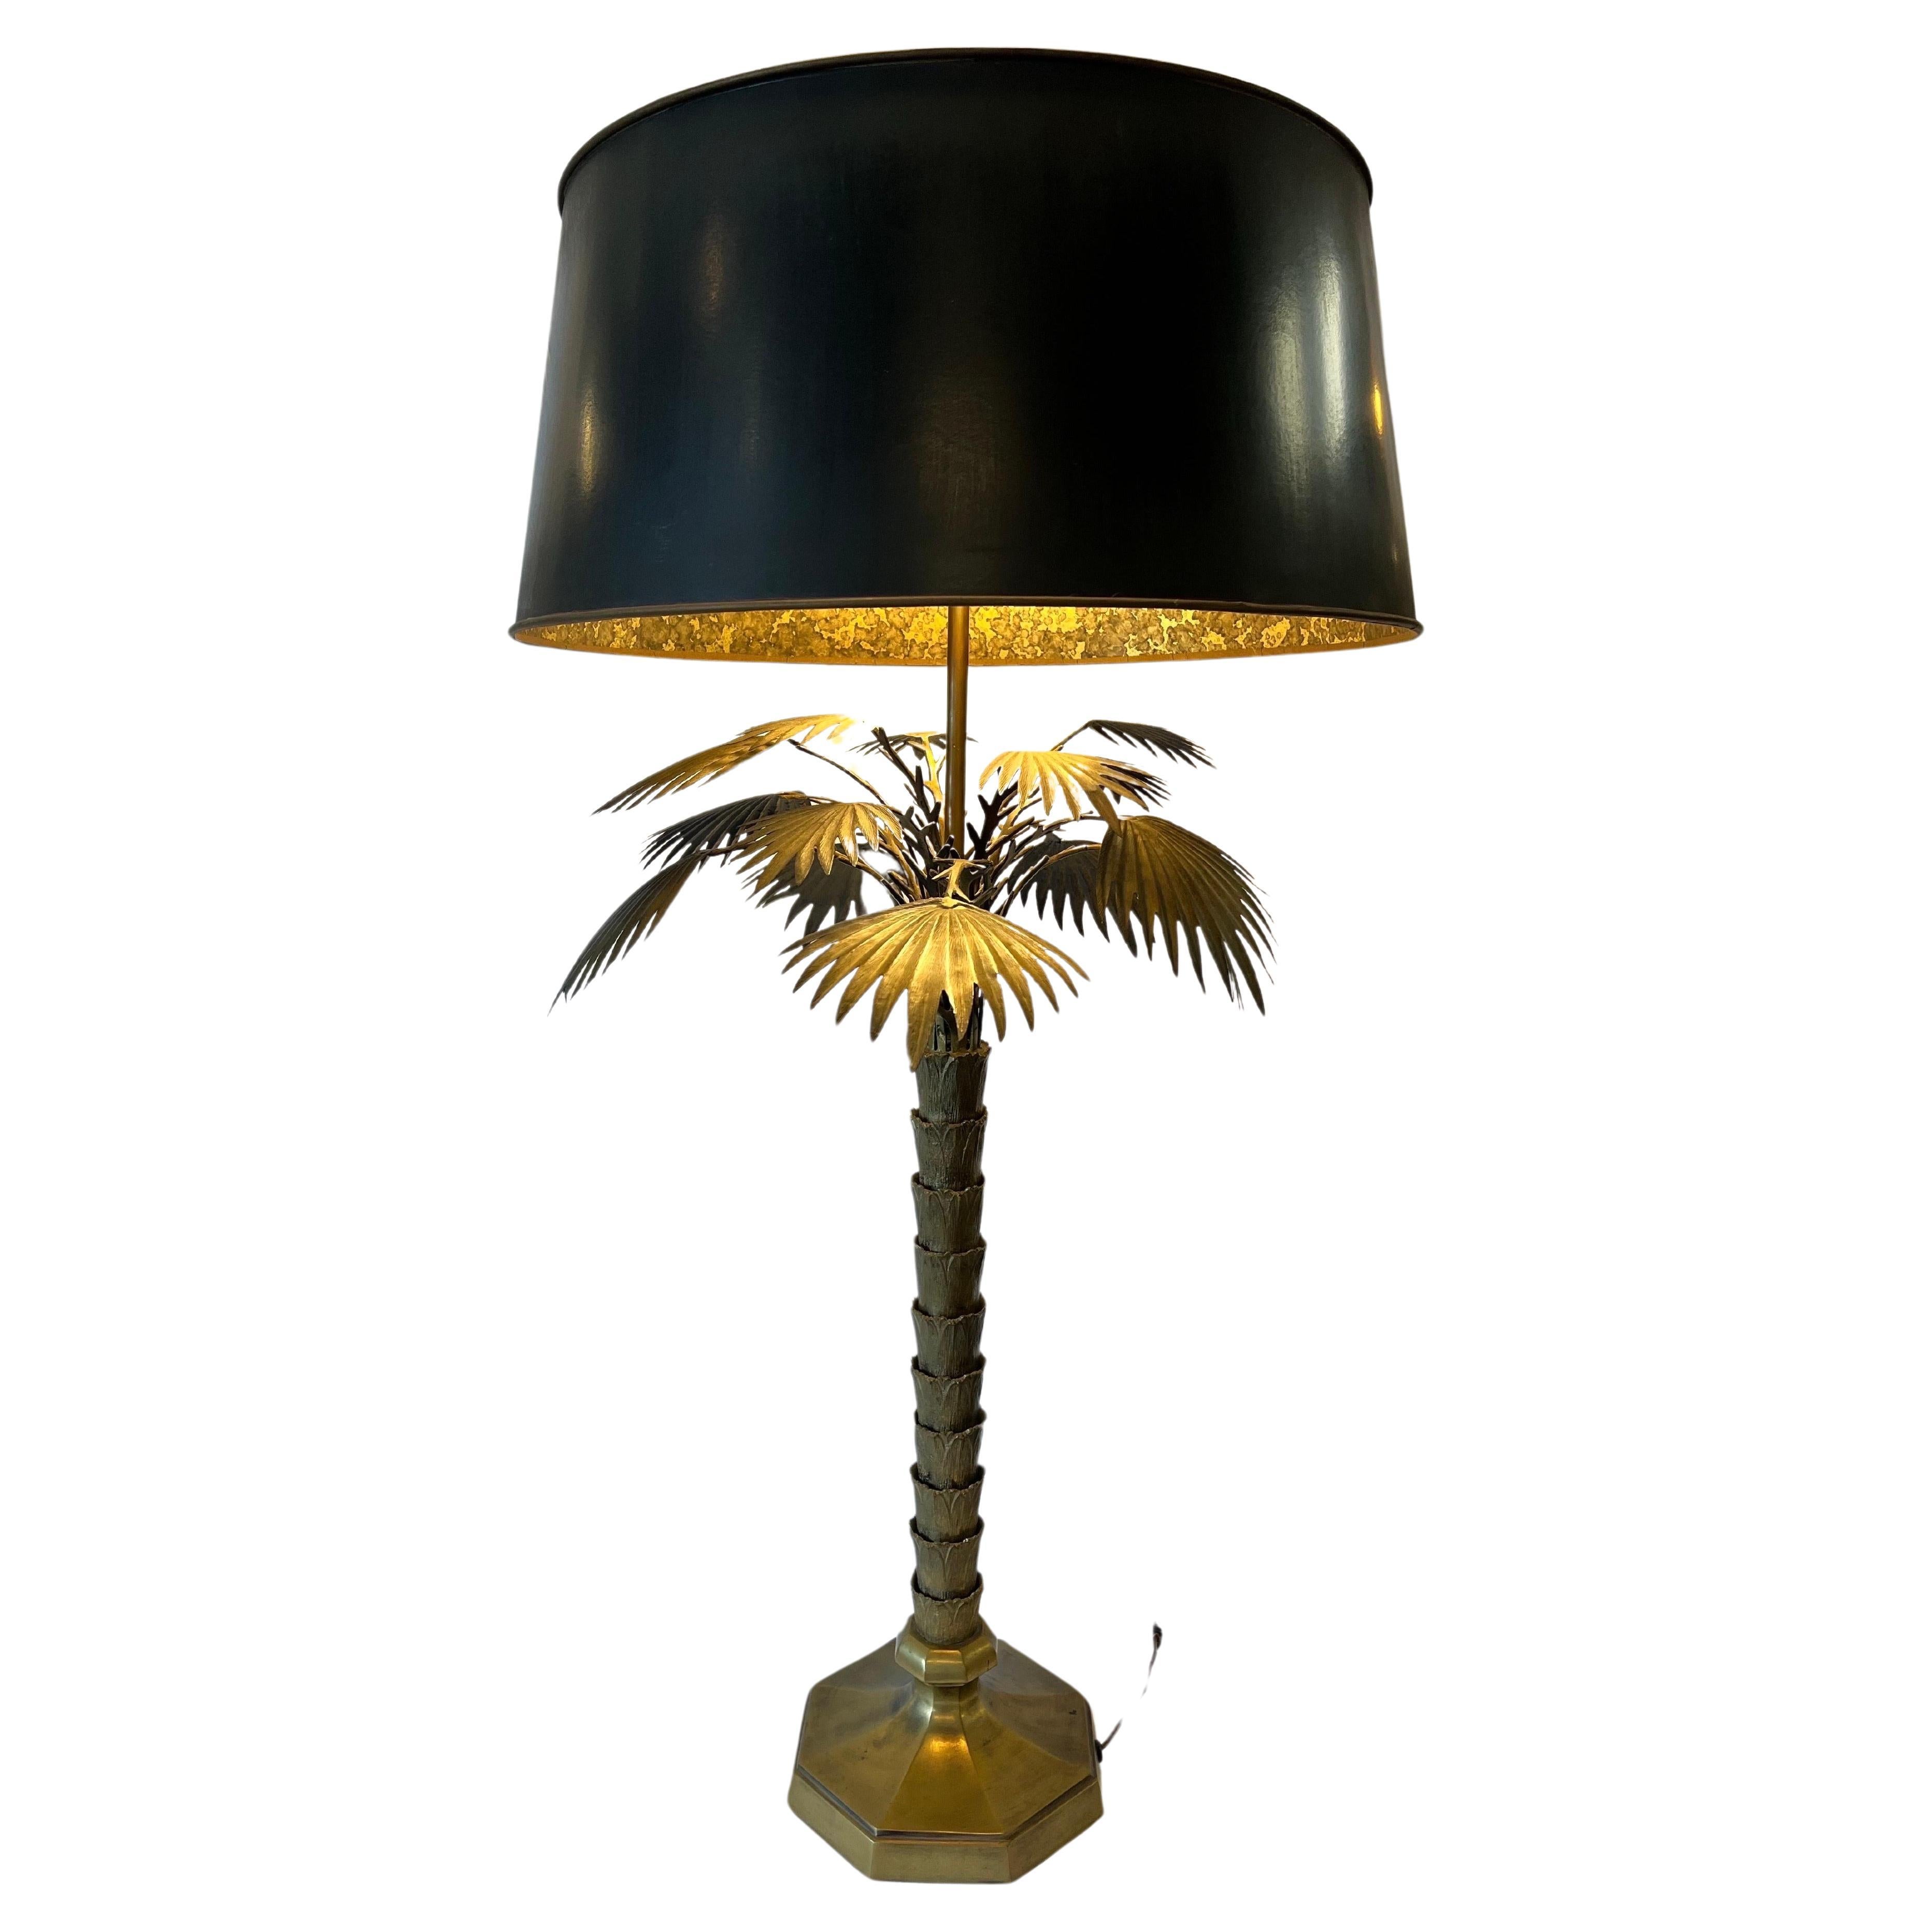 Vintage Chapman Palm Tree Table Lamp with Original Diffuser and Oil Drop Shade